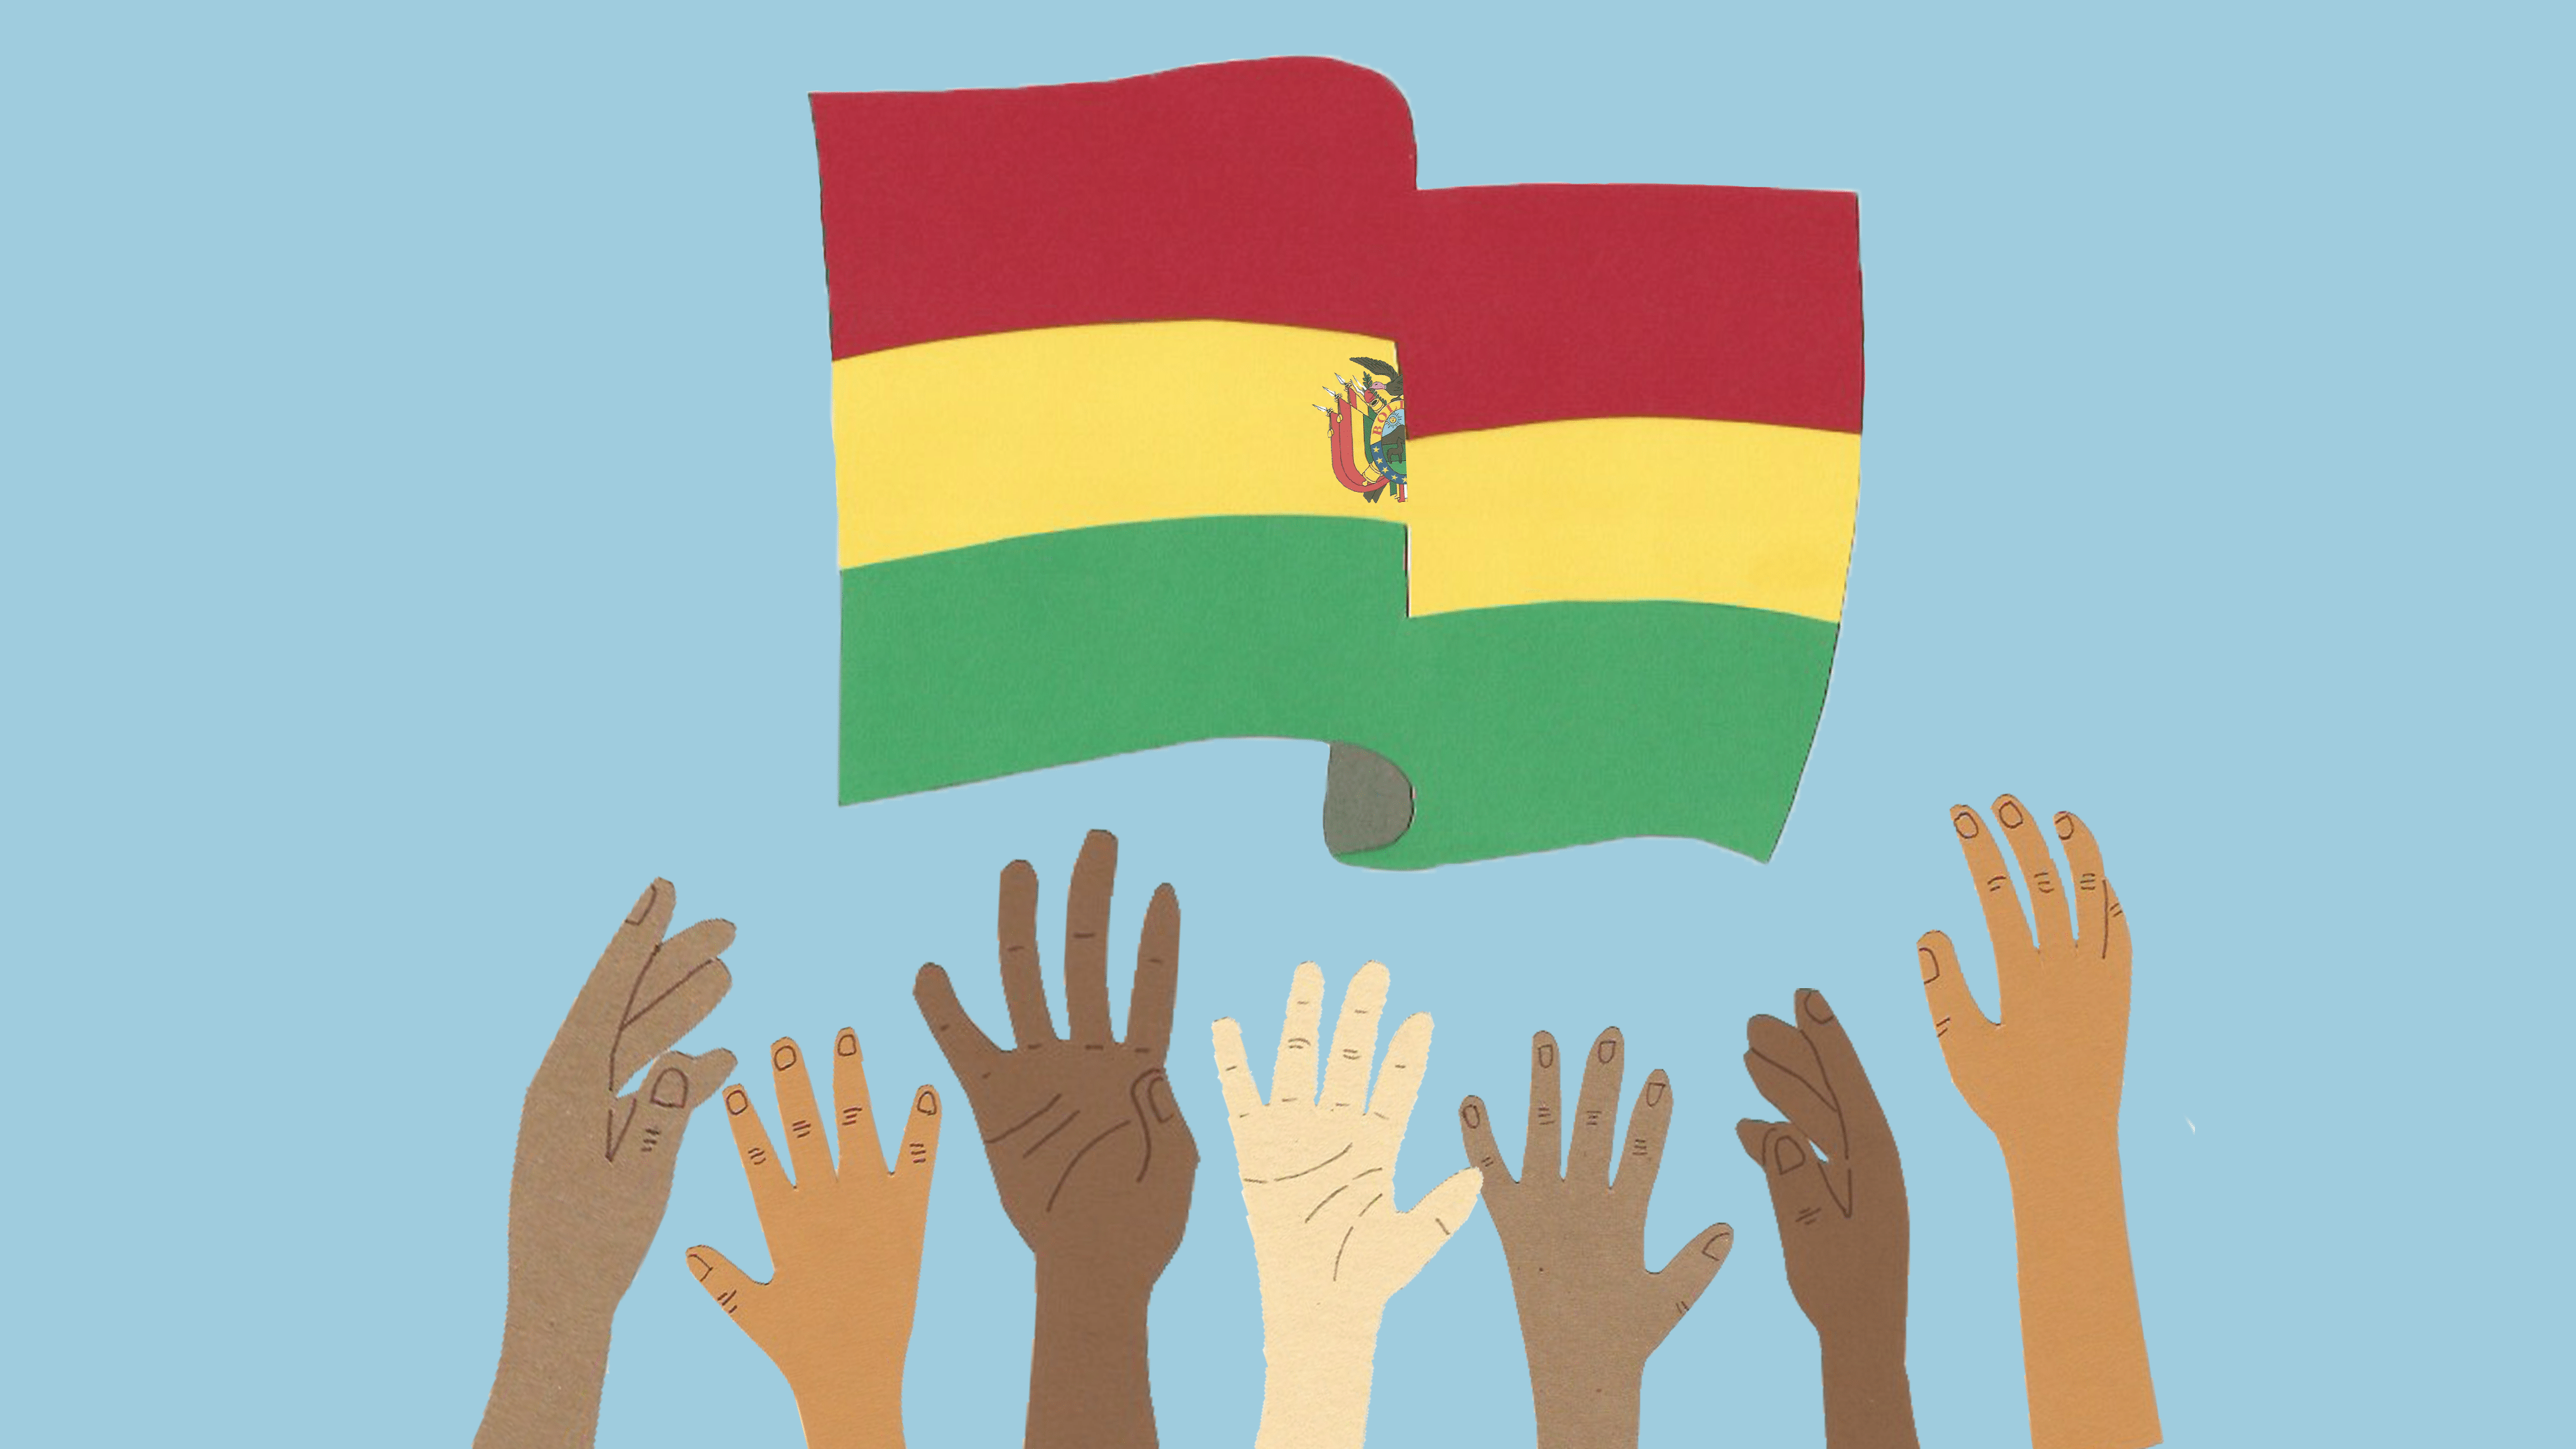 Several hands reach for the Bolivian flag on a blue background.